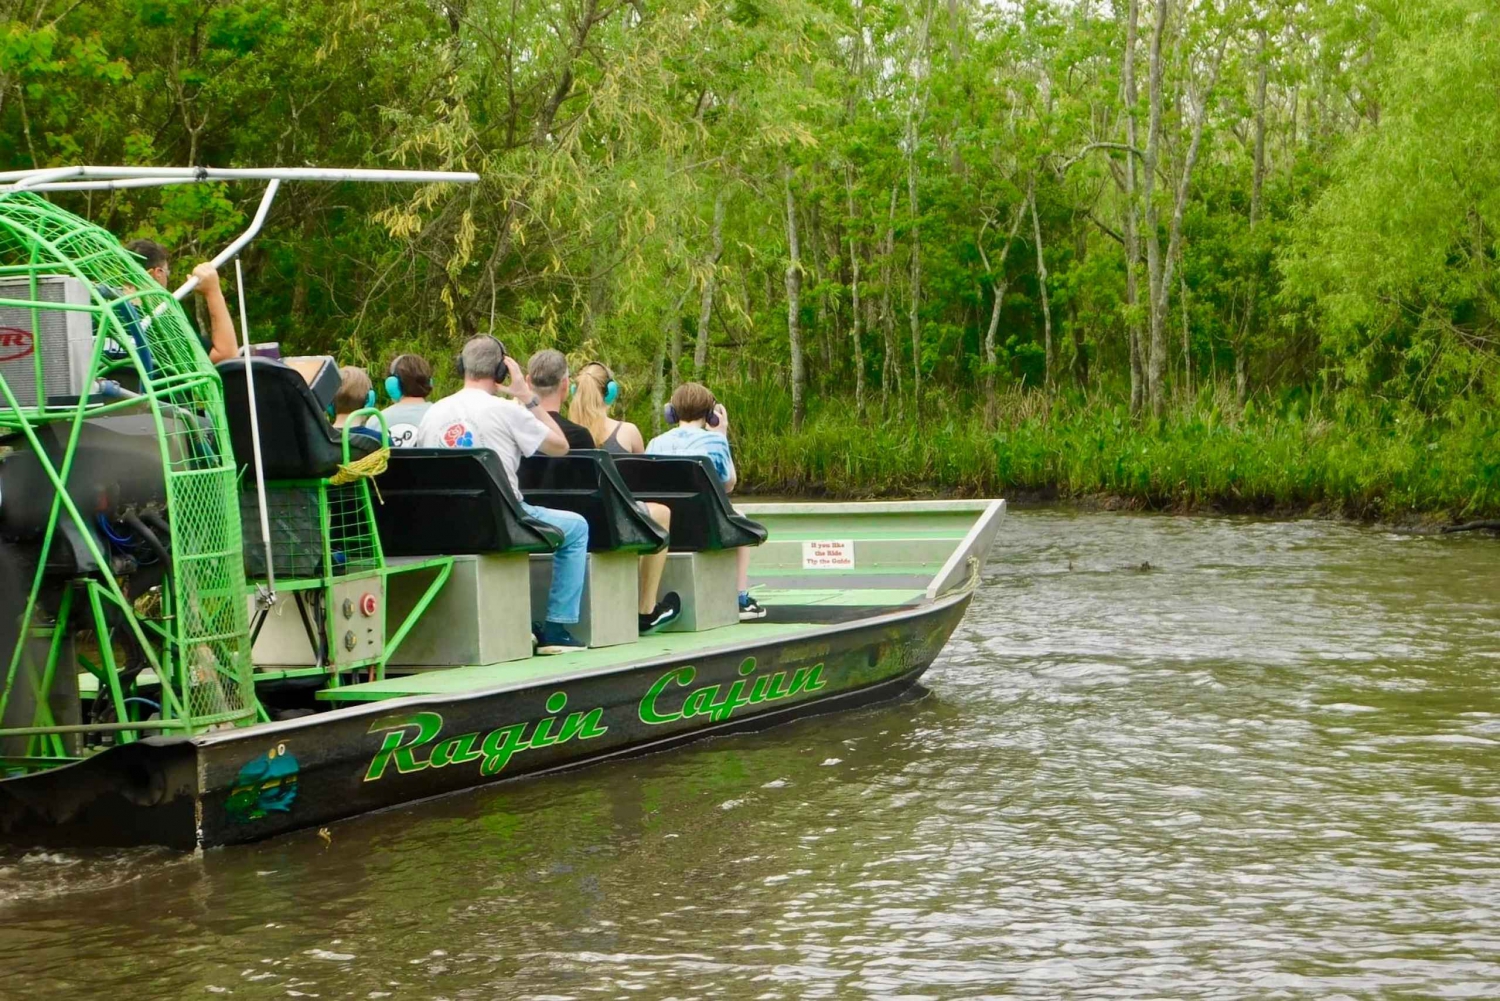 New Orleans: Oak Alley or Laura Plantation & Airboat Tour